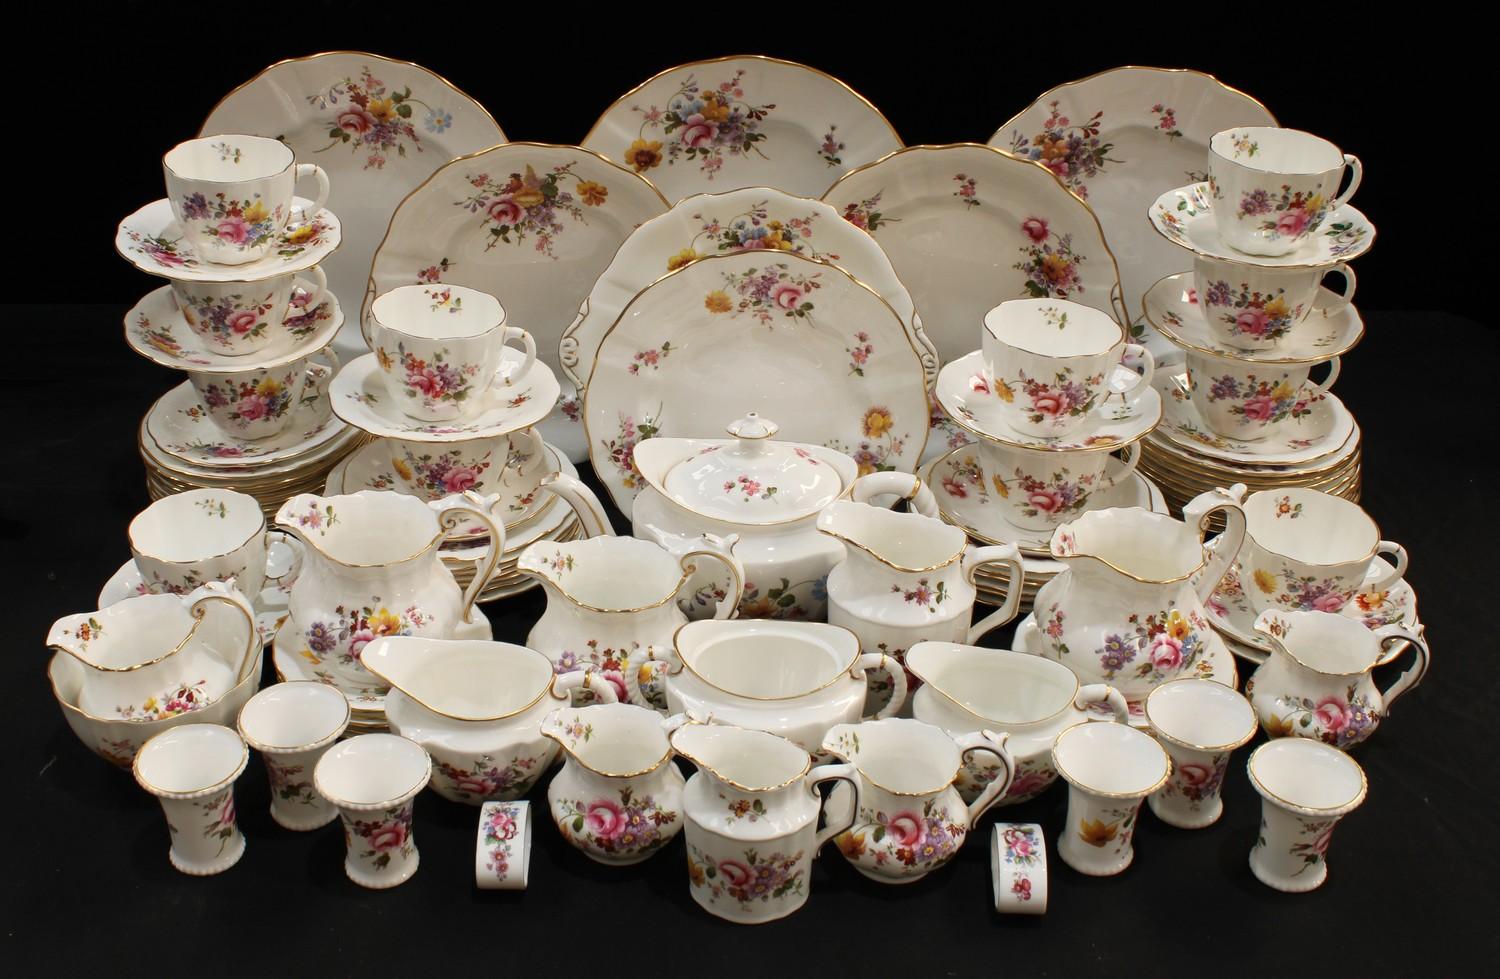 A Royal Crown Derby Posie pattern teapot, milk and sugar, teacups and saucers, teaplates, sandwich